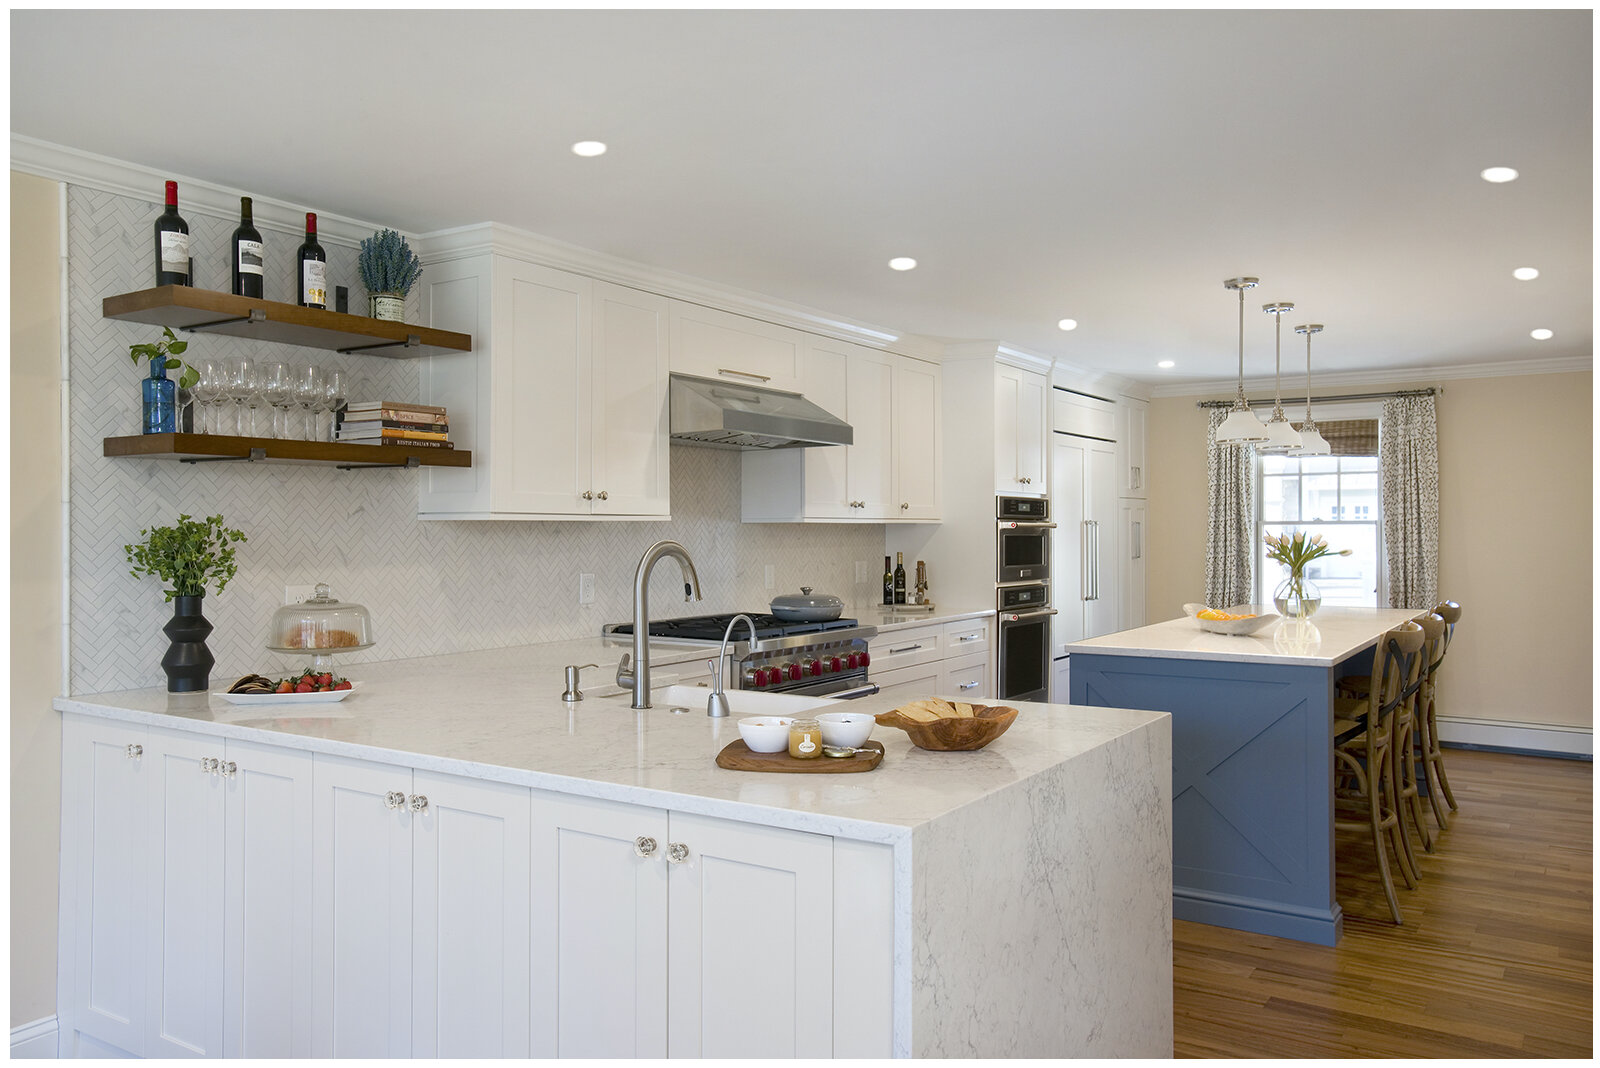 Home-addition-new-kitchen-Wellesley-KitchenVisions.jpg